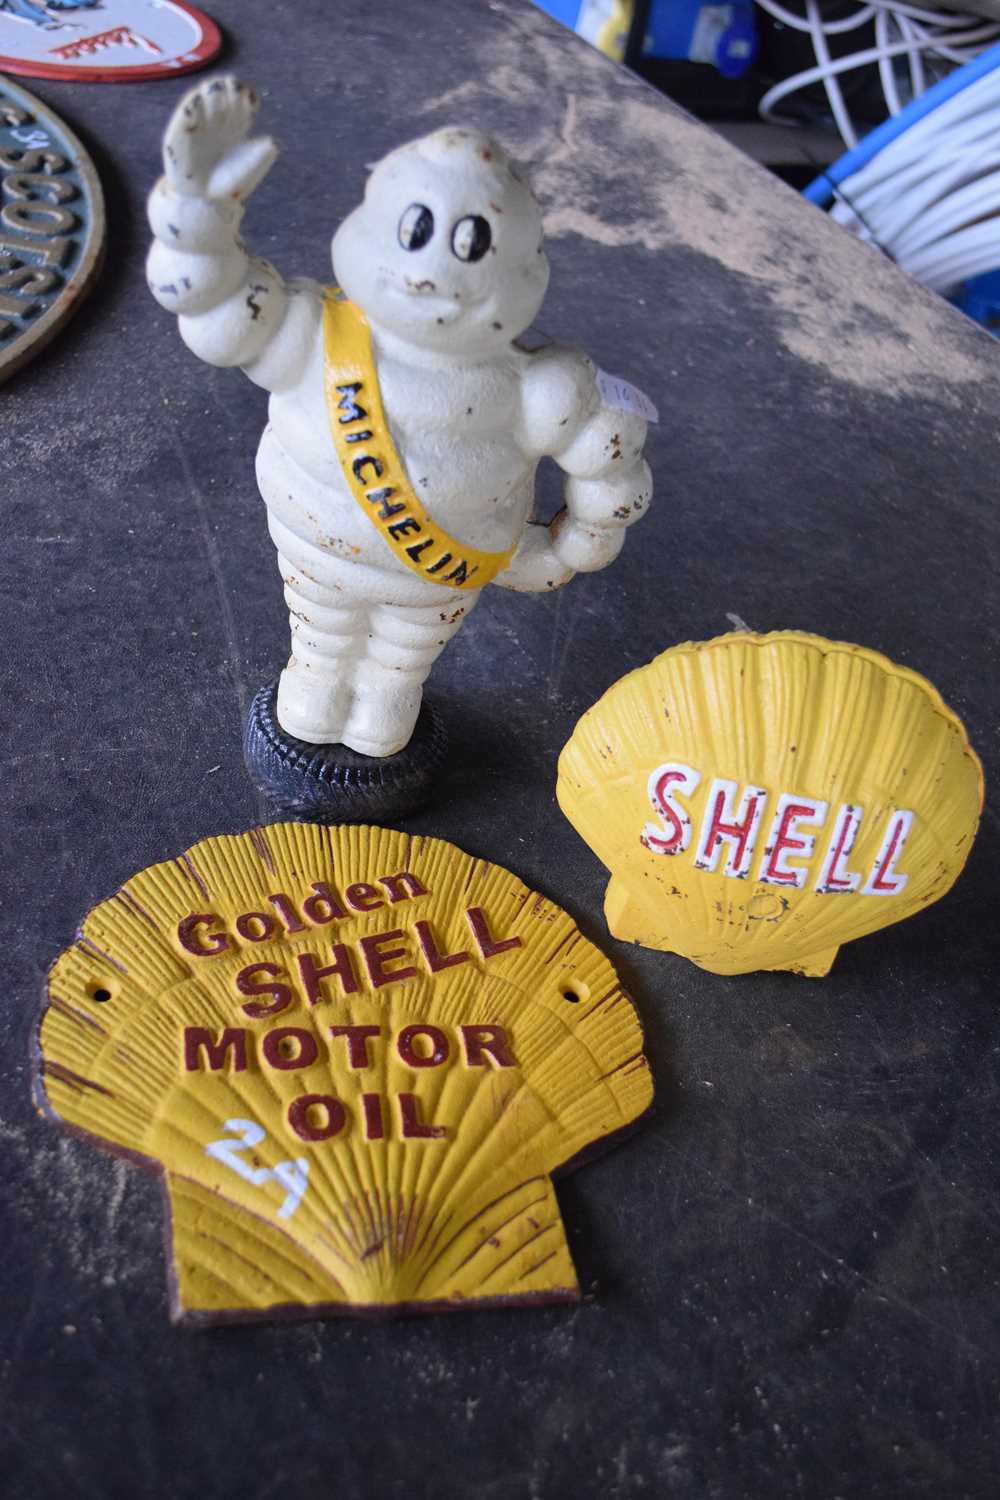 Cast Michelin money box together with a further cast Shell money box and a cast 'Shell motor oil" - Image 2 of 2